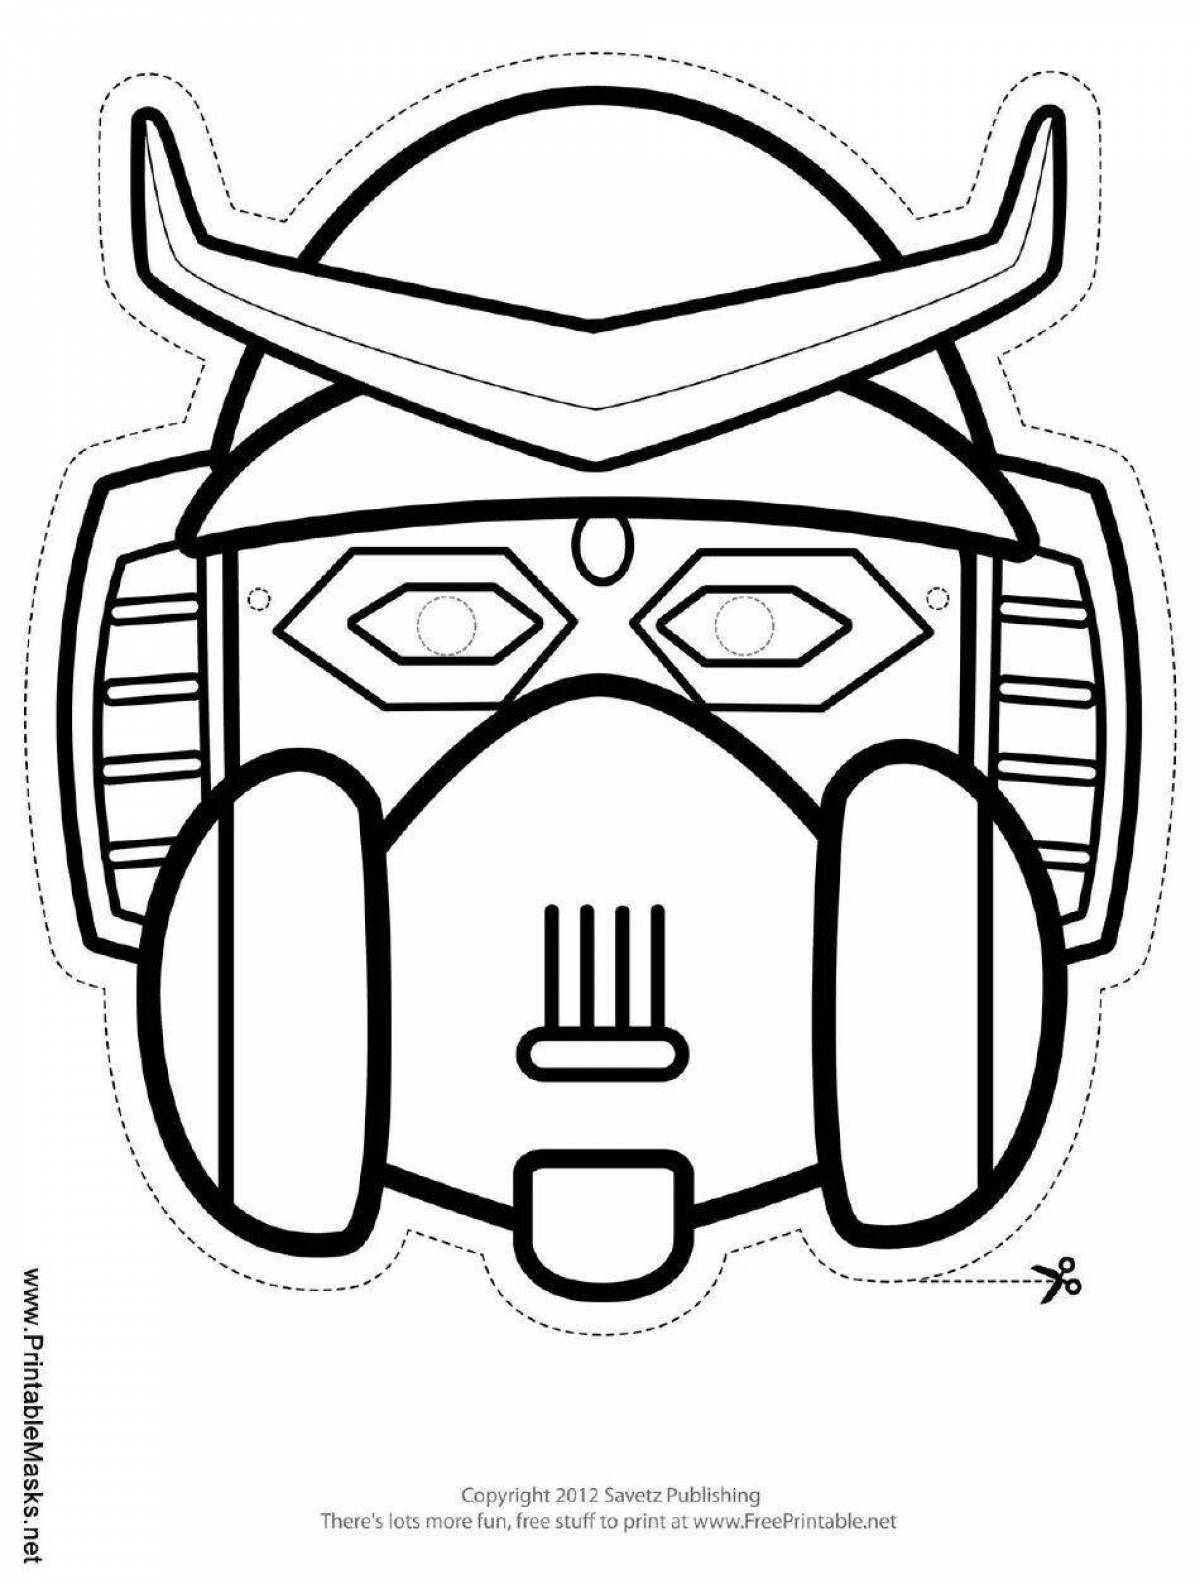 Coloring book bright robot mask